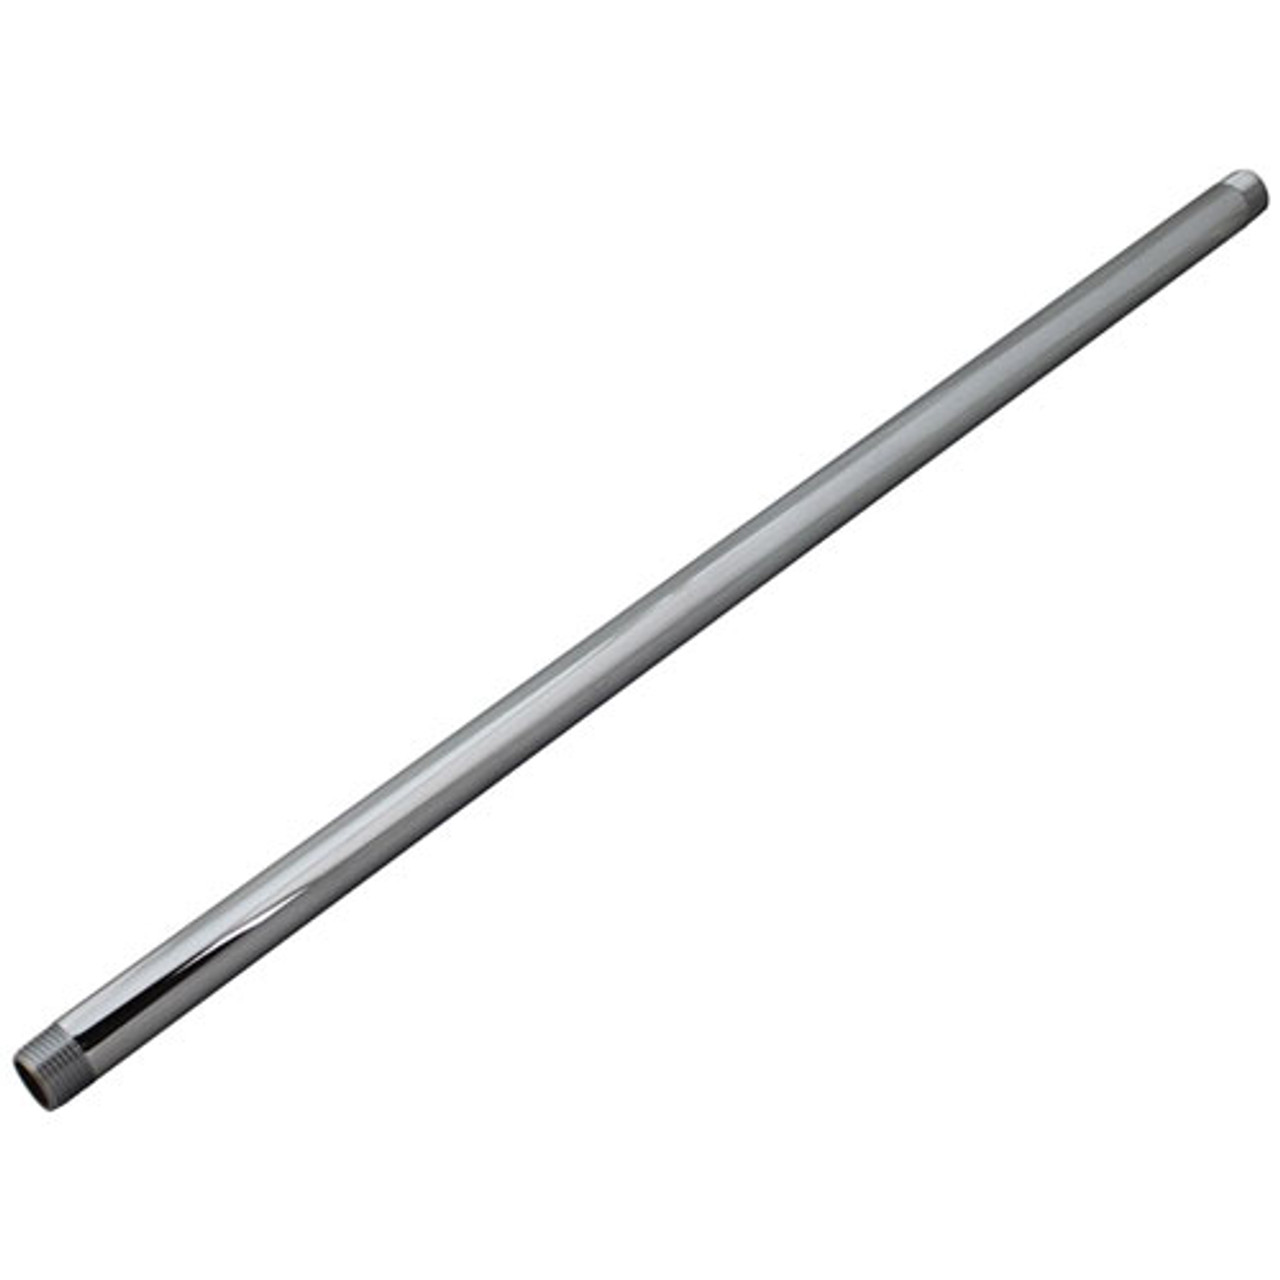 Riser Tube - 18" - Replacement Part For T&S Brass 5R